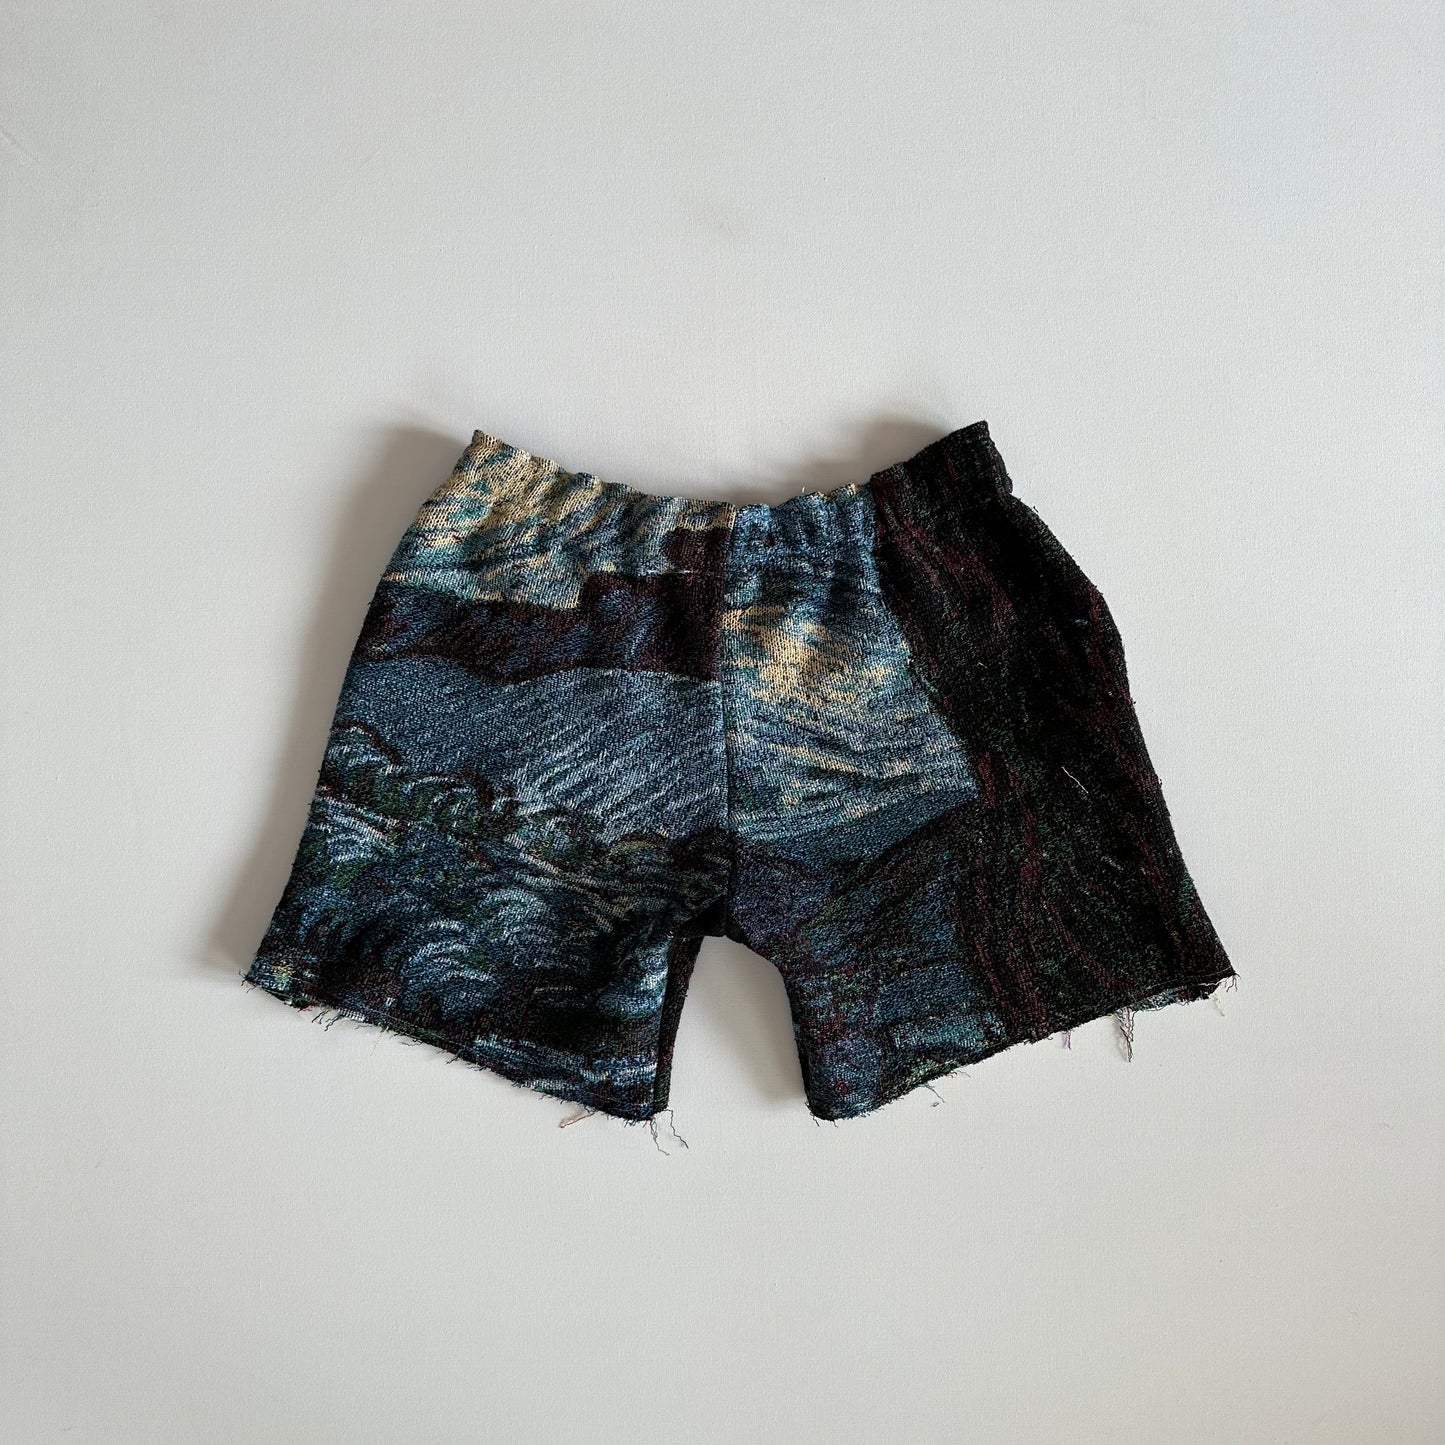 Cut and Sew Van Gogh “Starry Night” Tapestry Shorts